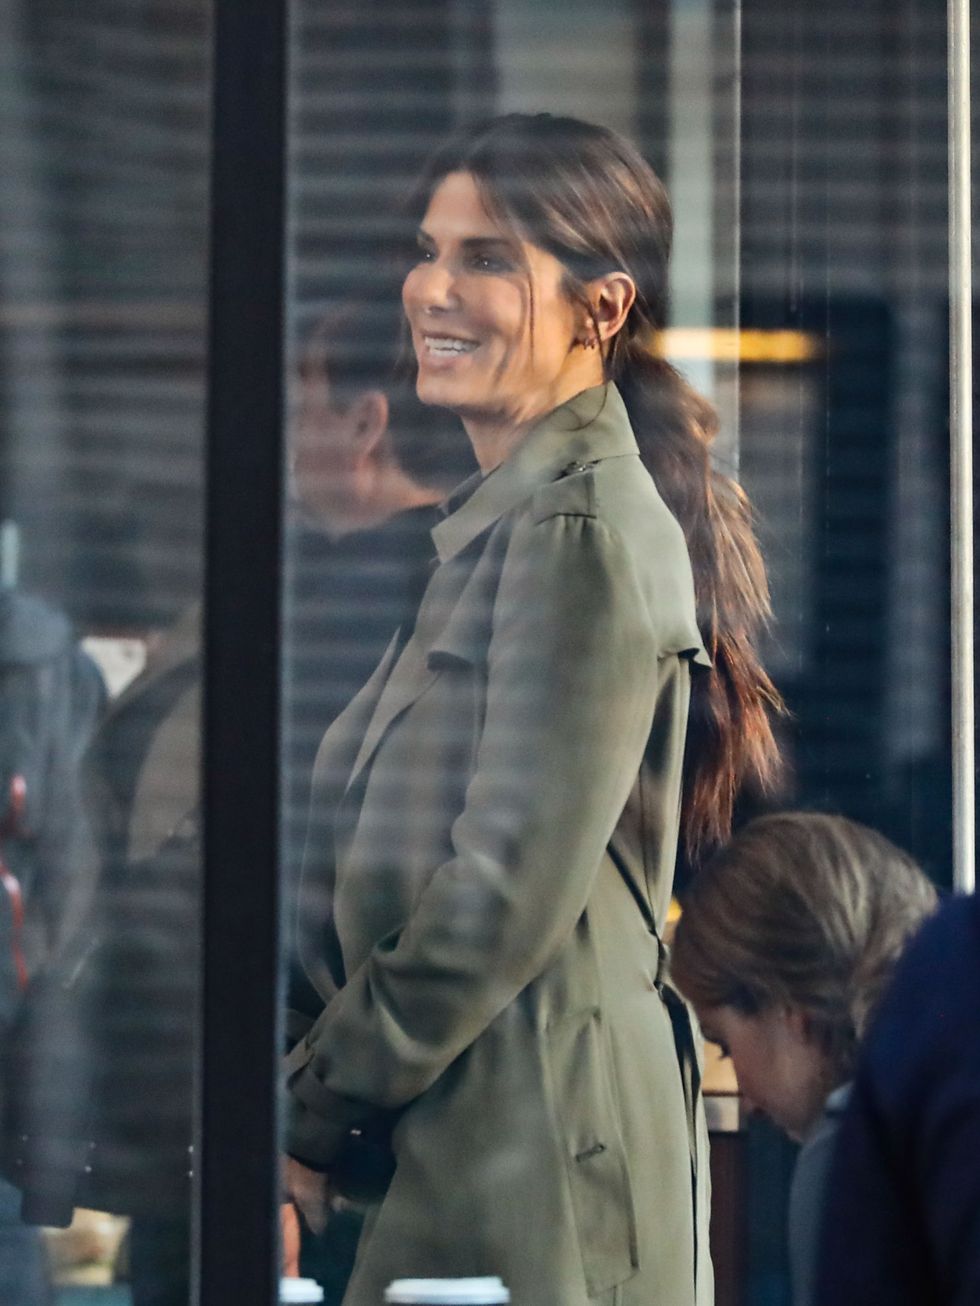 NEW YORK, NY - OCTOBER 24: Sandra Bullock is seen on October 24, 2016 in New York City.  (Photo by Ignat/Bauer-Griffin/GC Images)